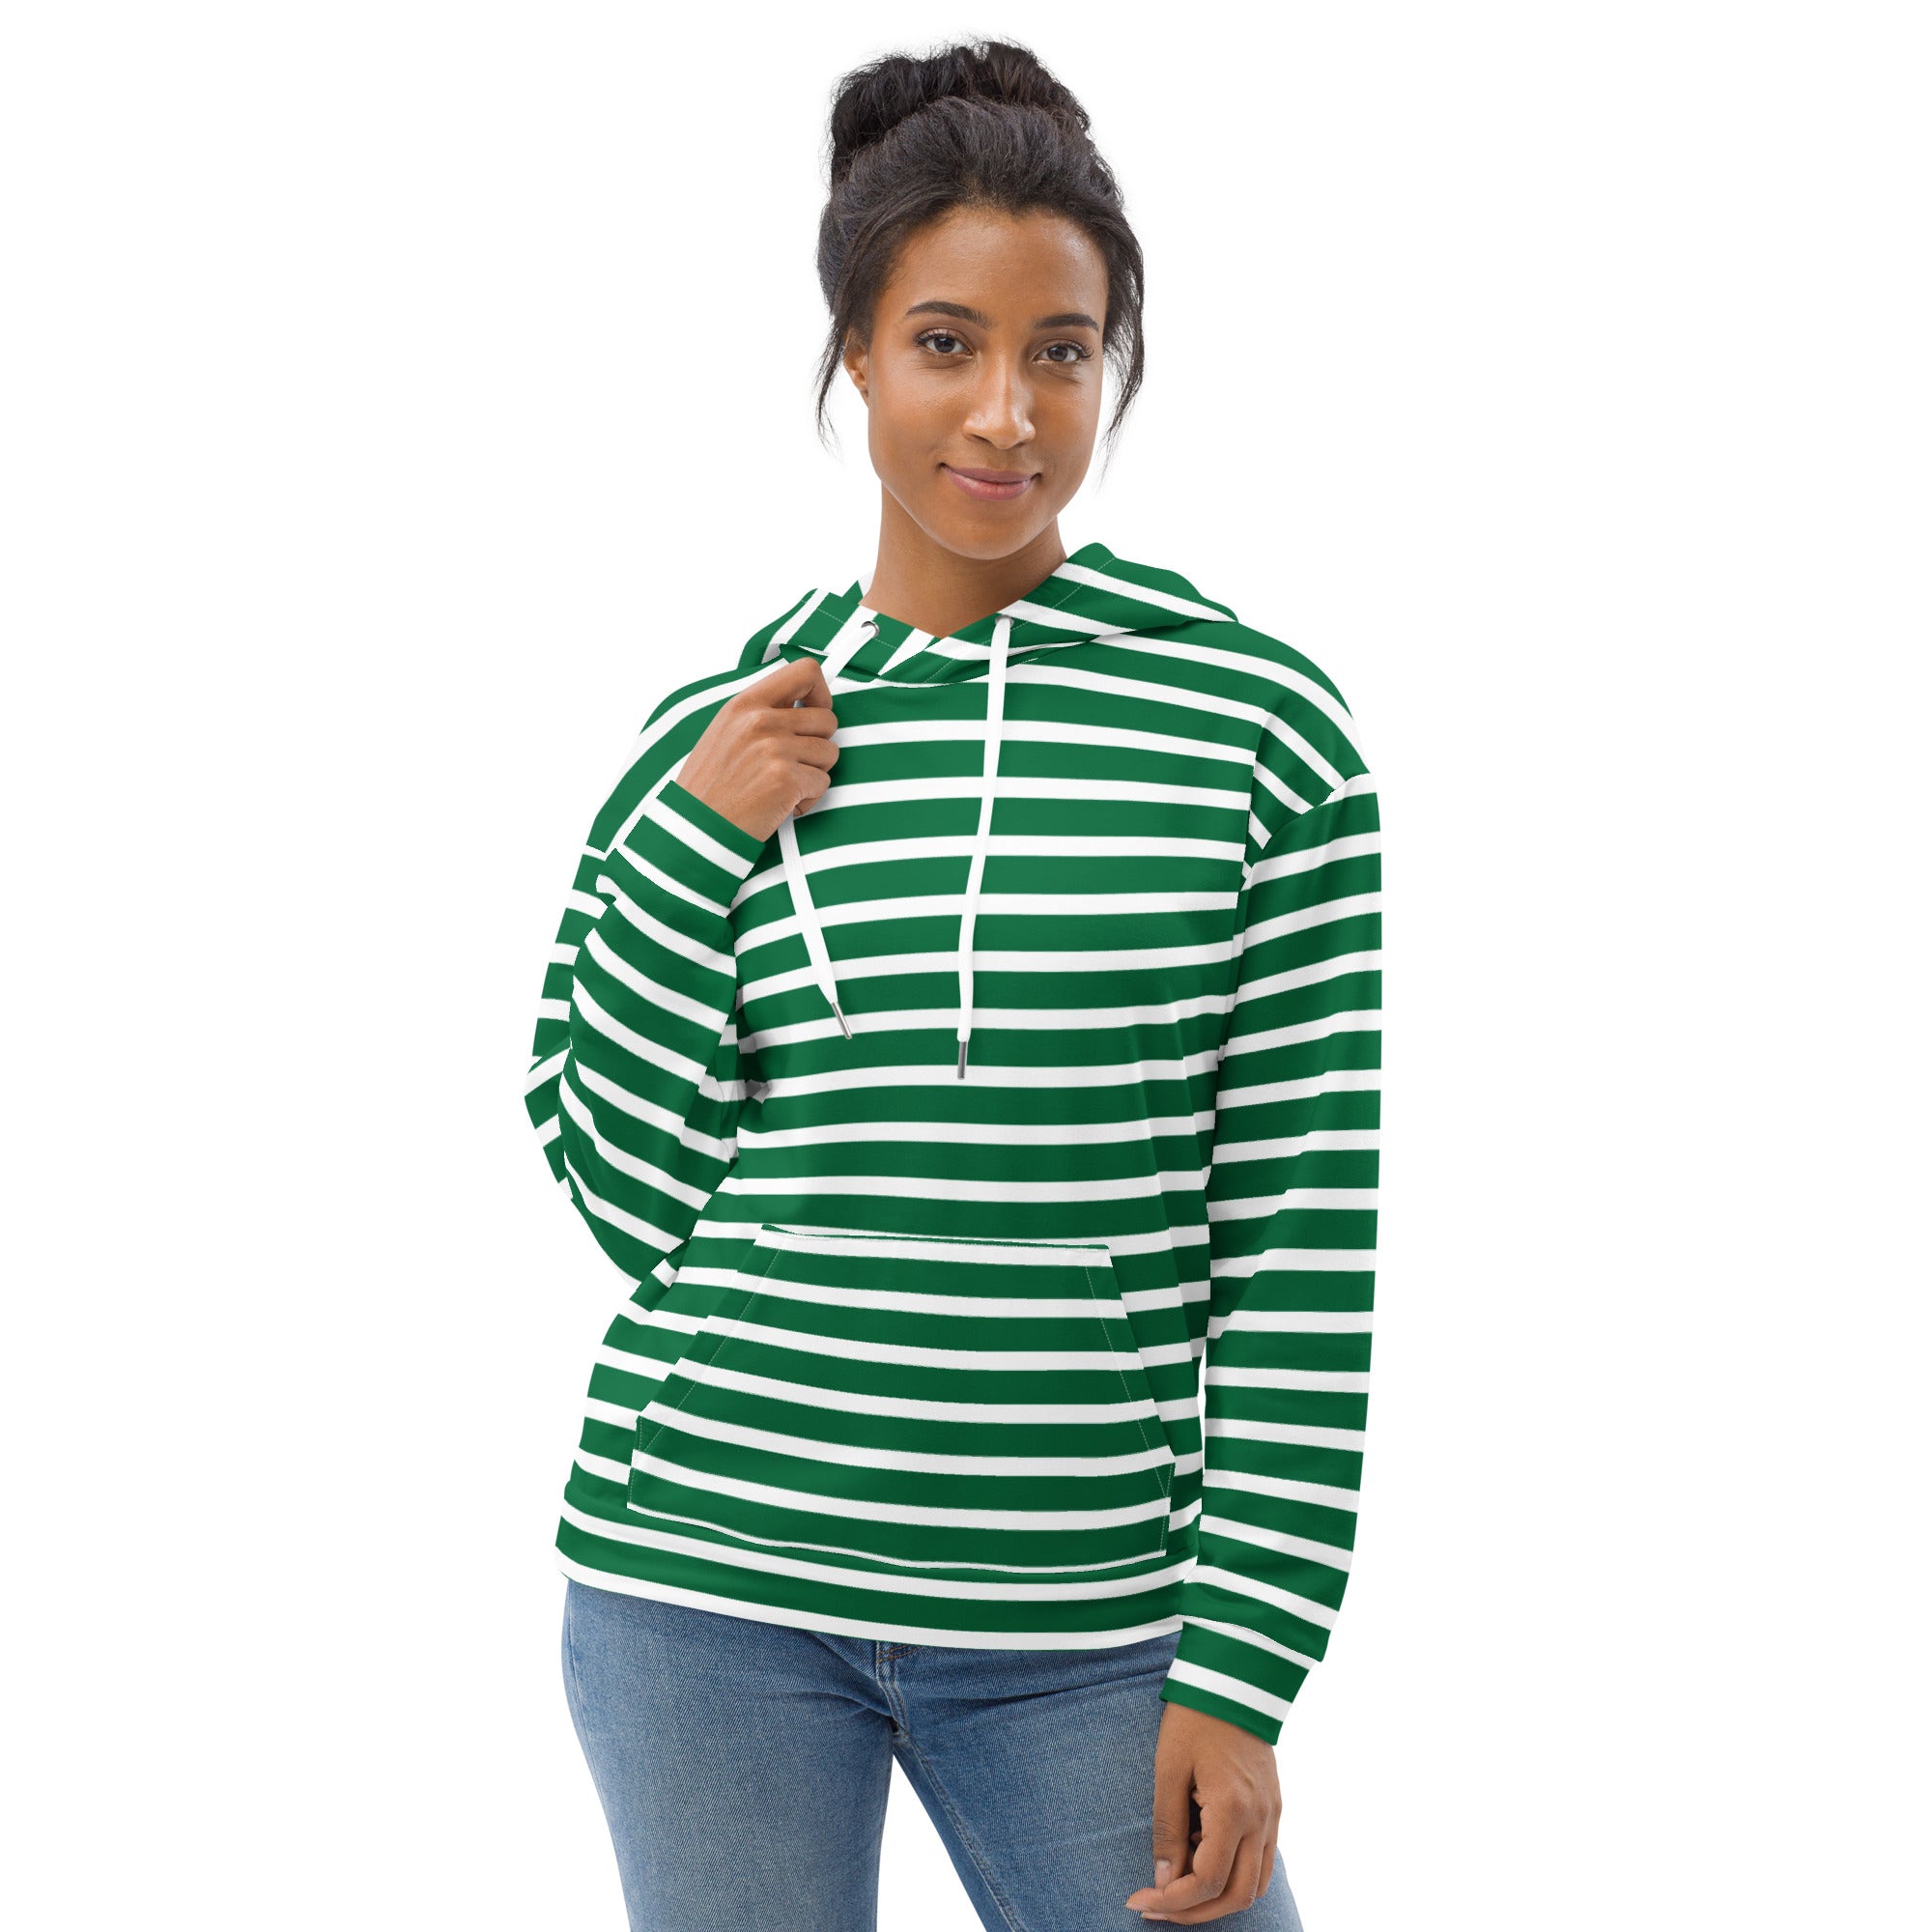 Unisex Hoodie- White and Green Striped